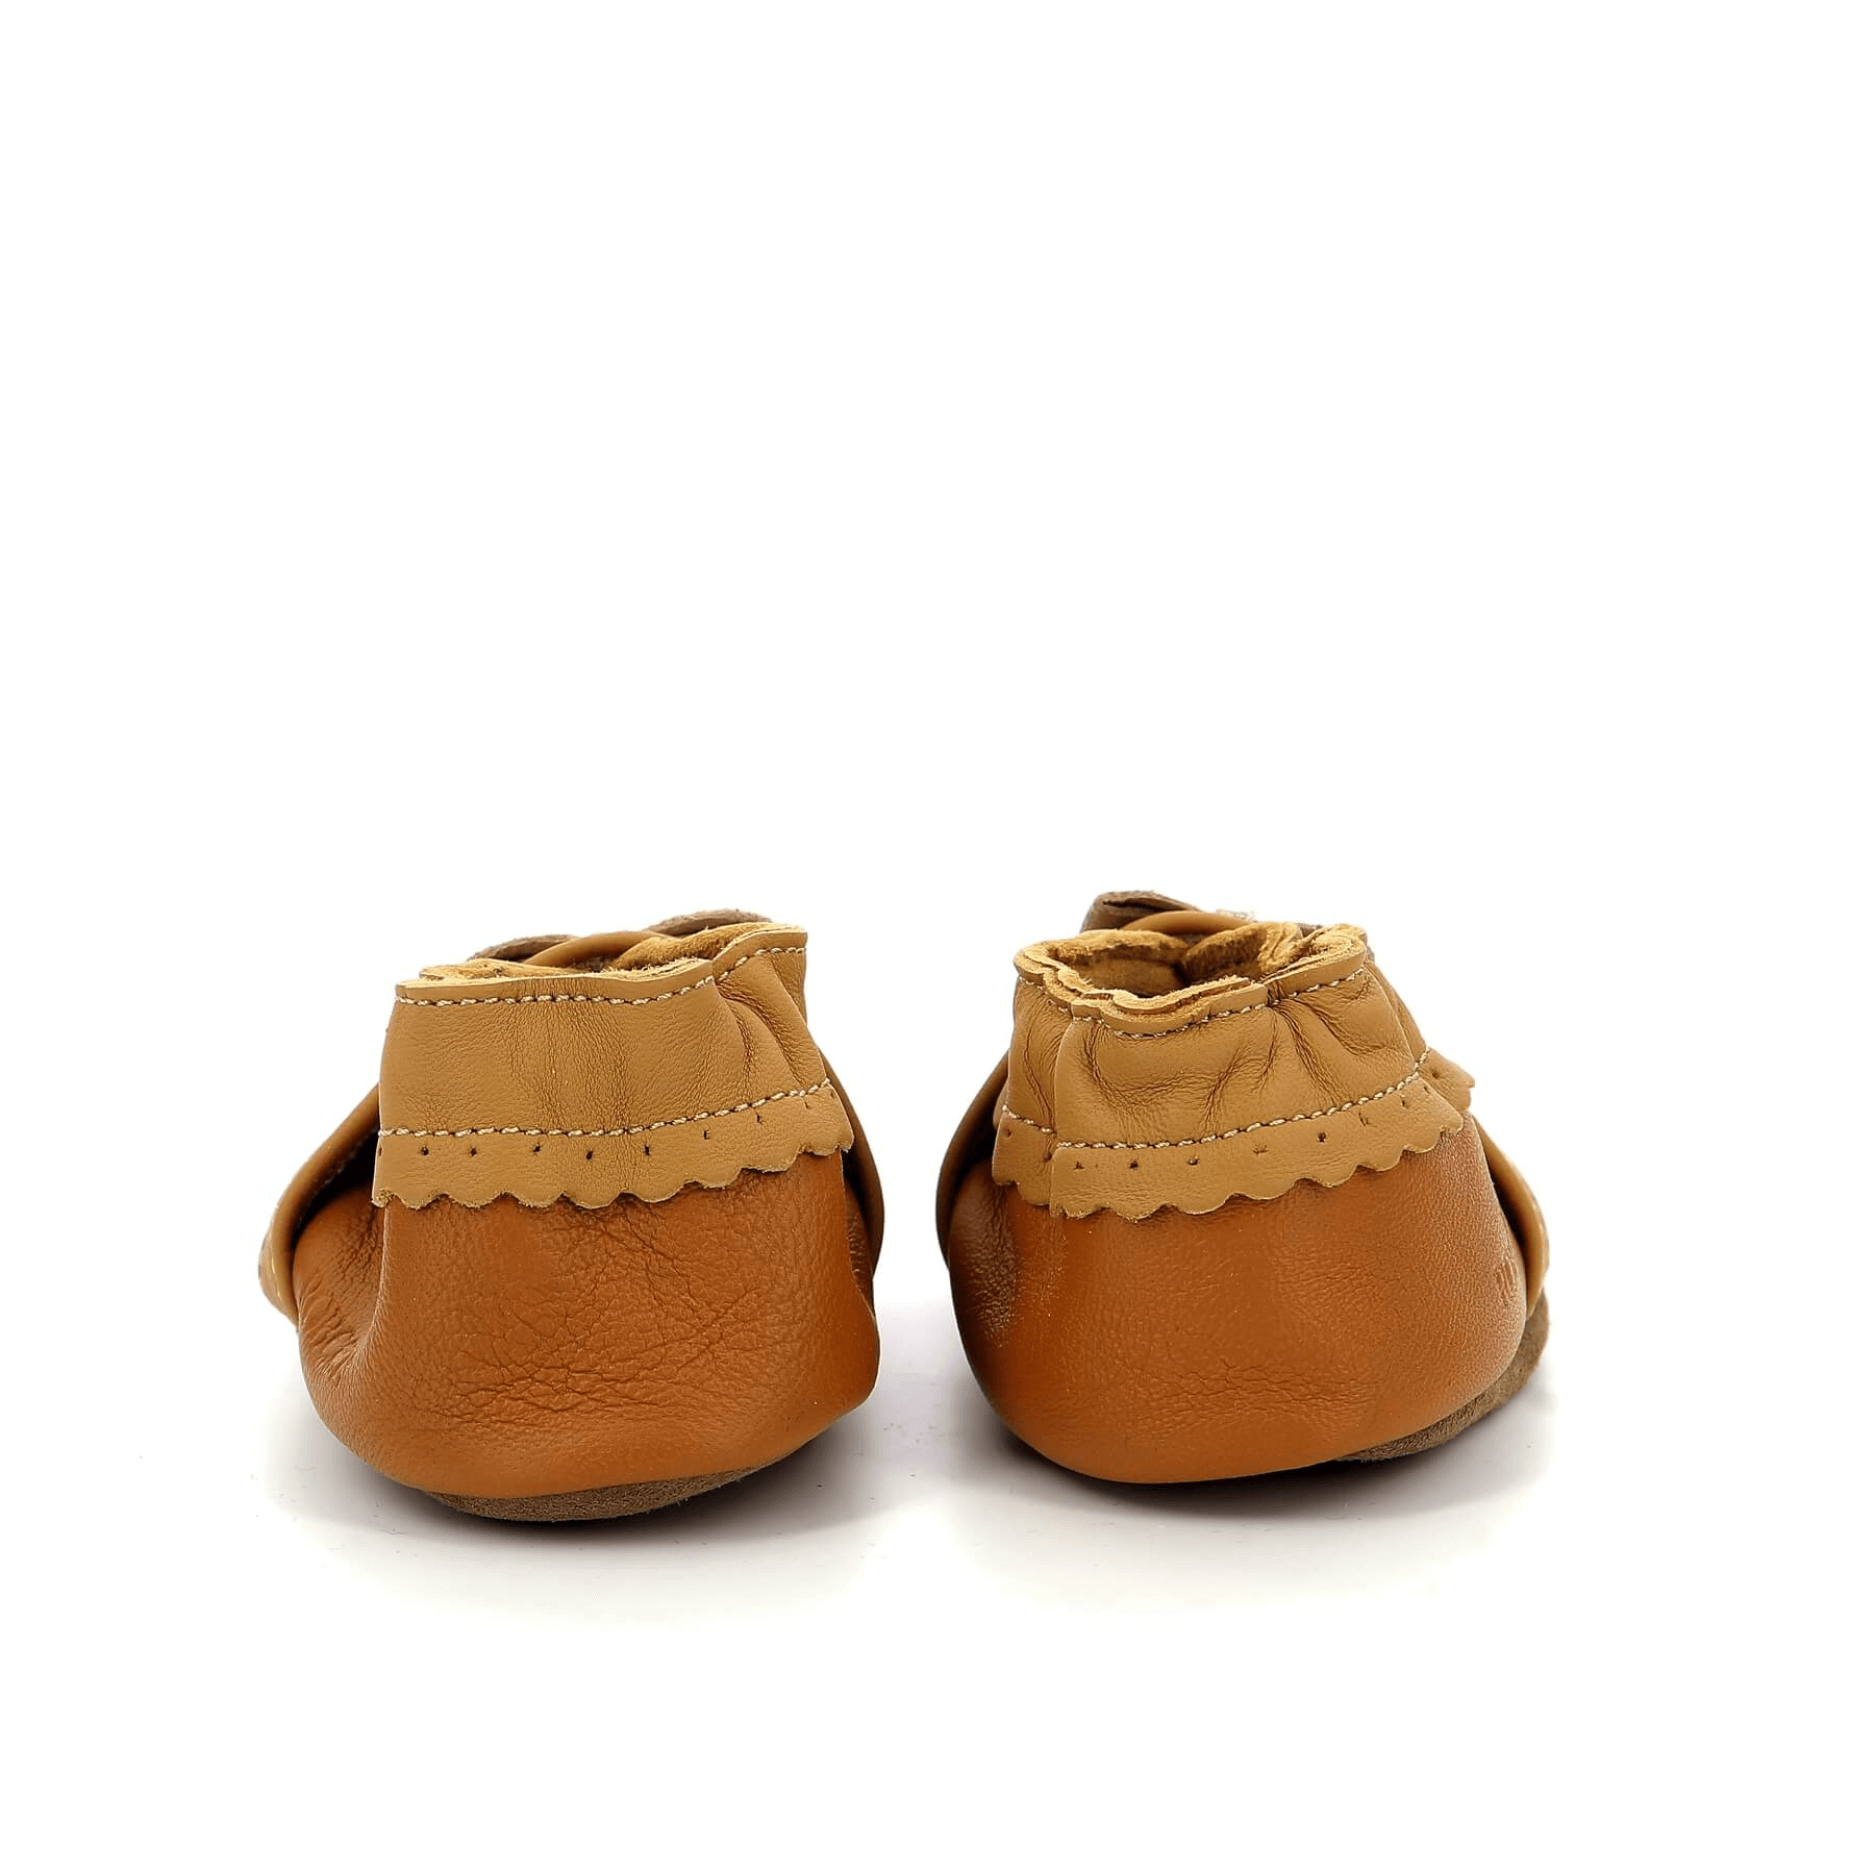 ROBEEZ Chaussons Happy Mood Camel ma petite pointure 